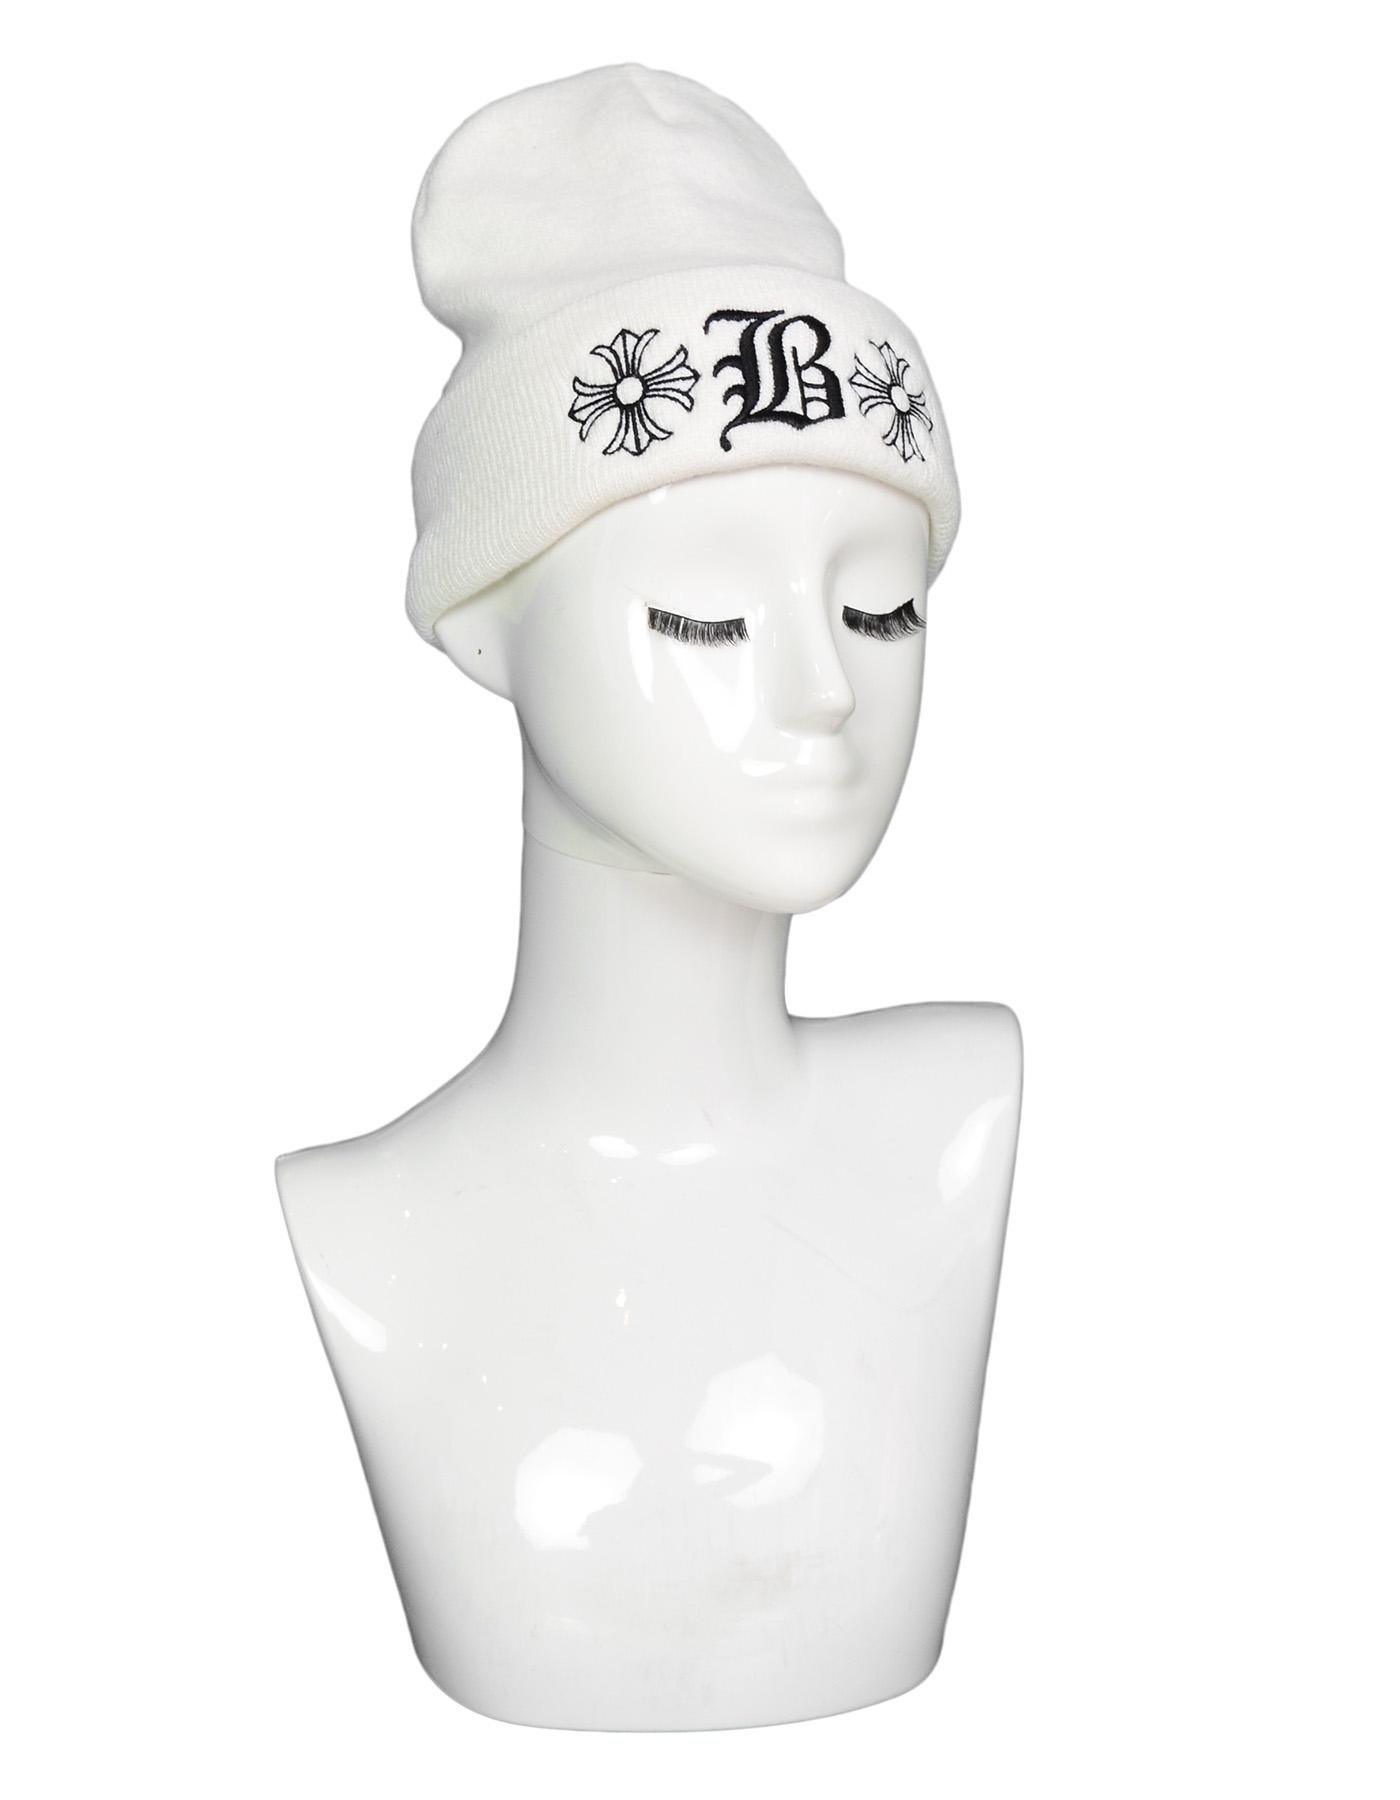 Chrome Hearts x Bella Hadid Limited Edition White Beanie
Features black embroidered old english 